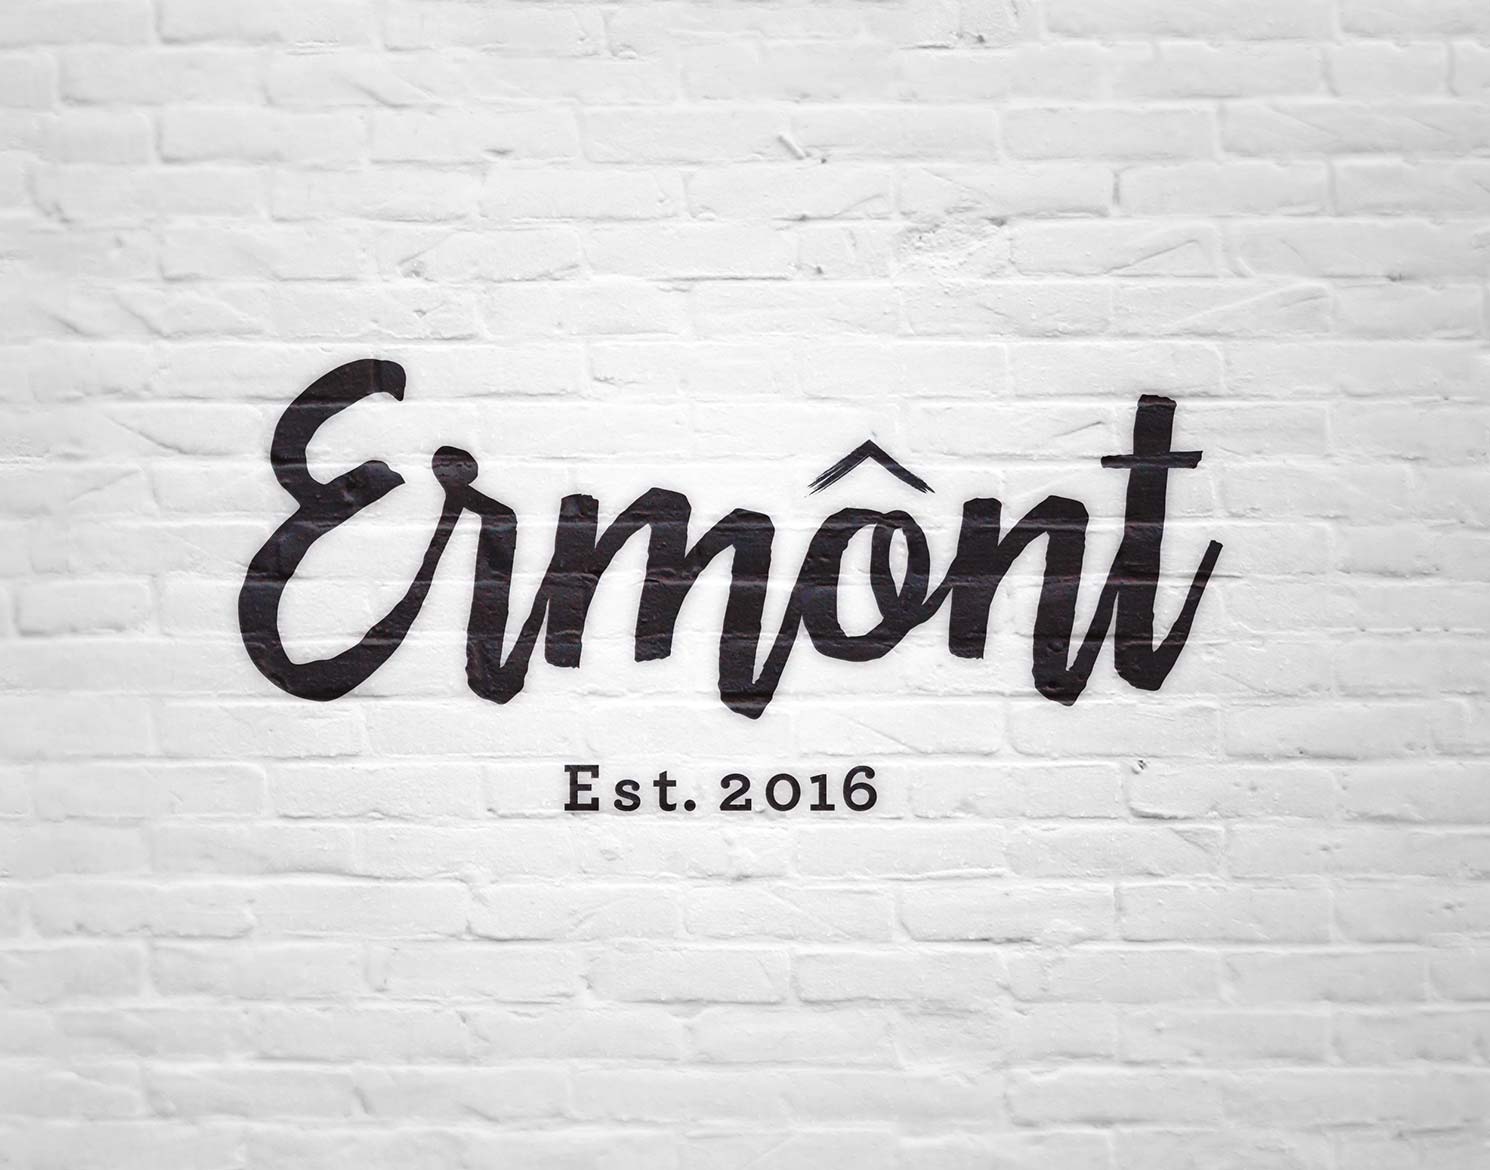 Ermont logo on wall